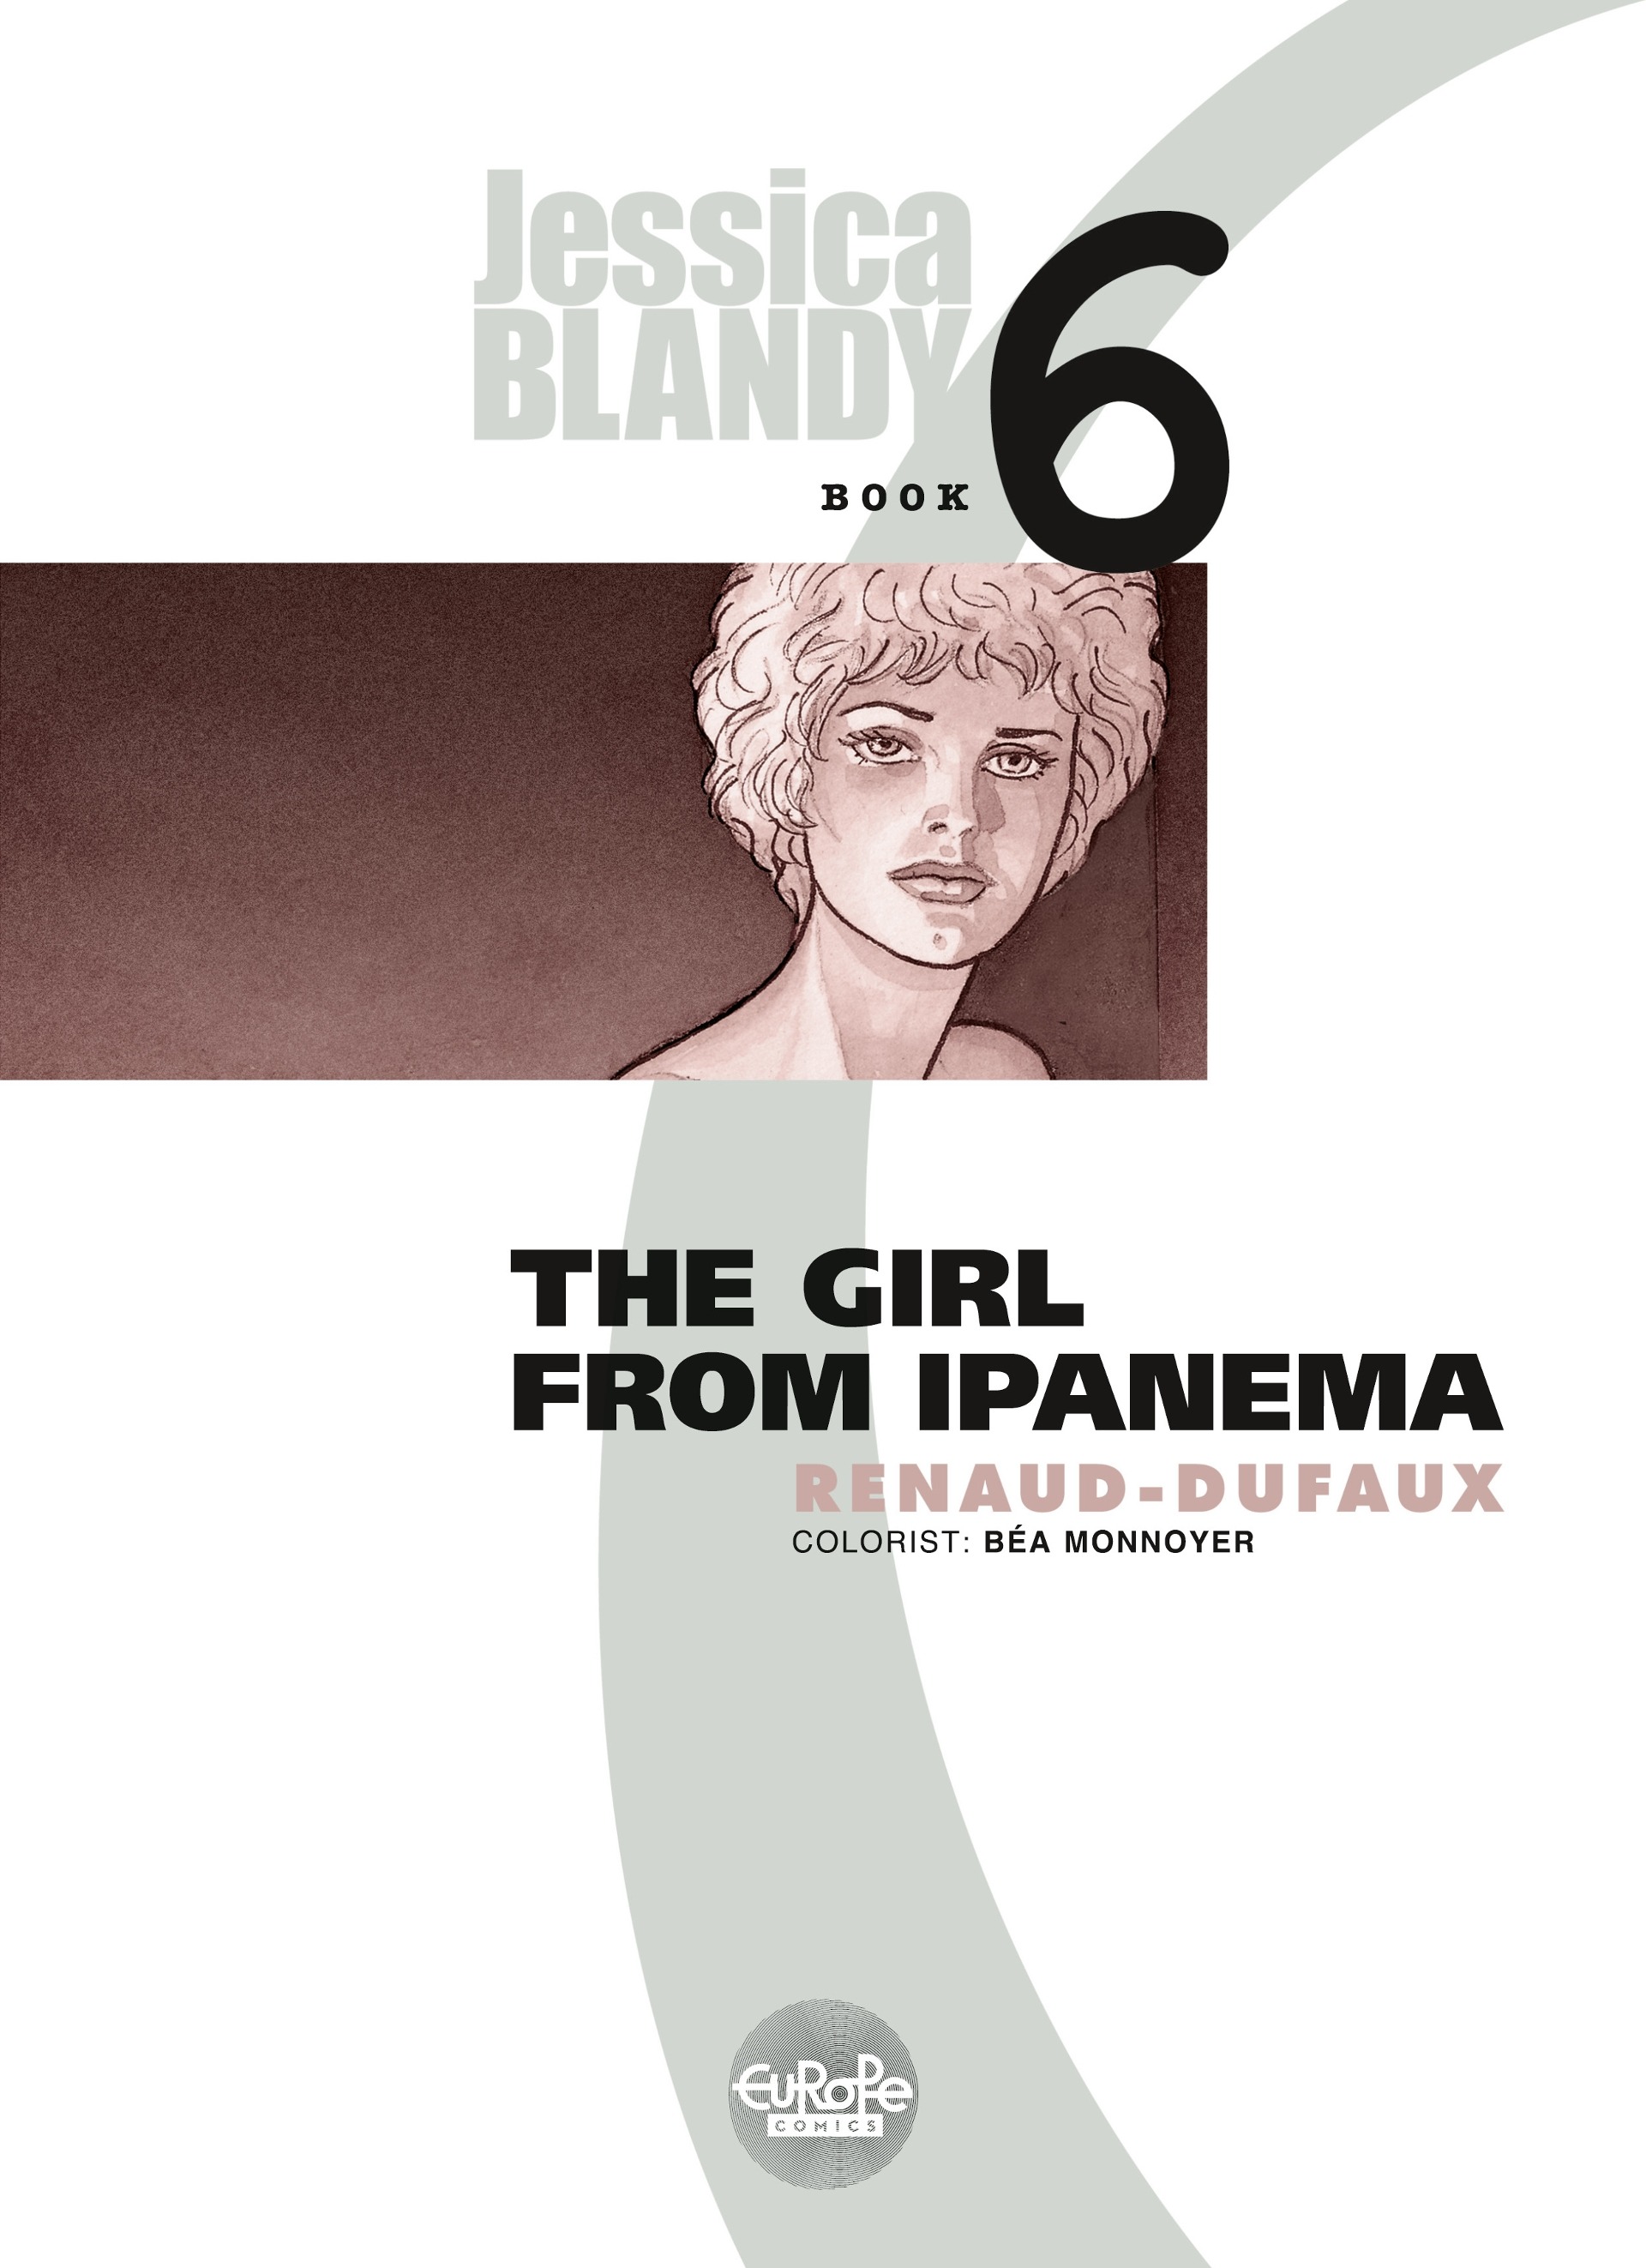 Read online Jessica Blandy comic -  Issue #6 - 2